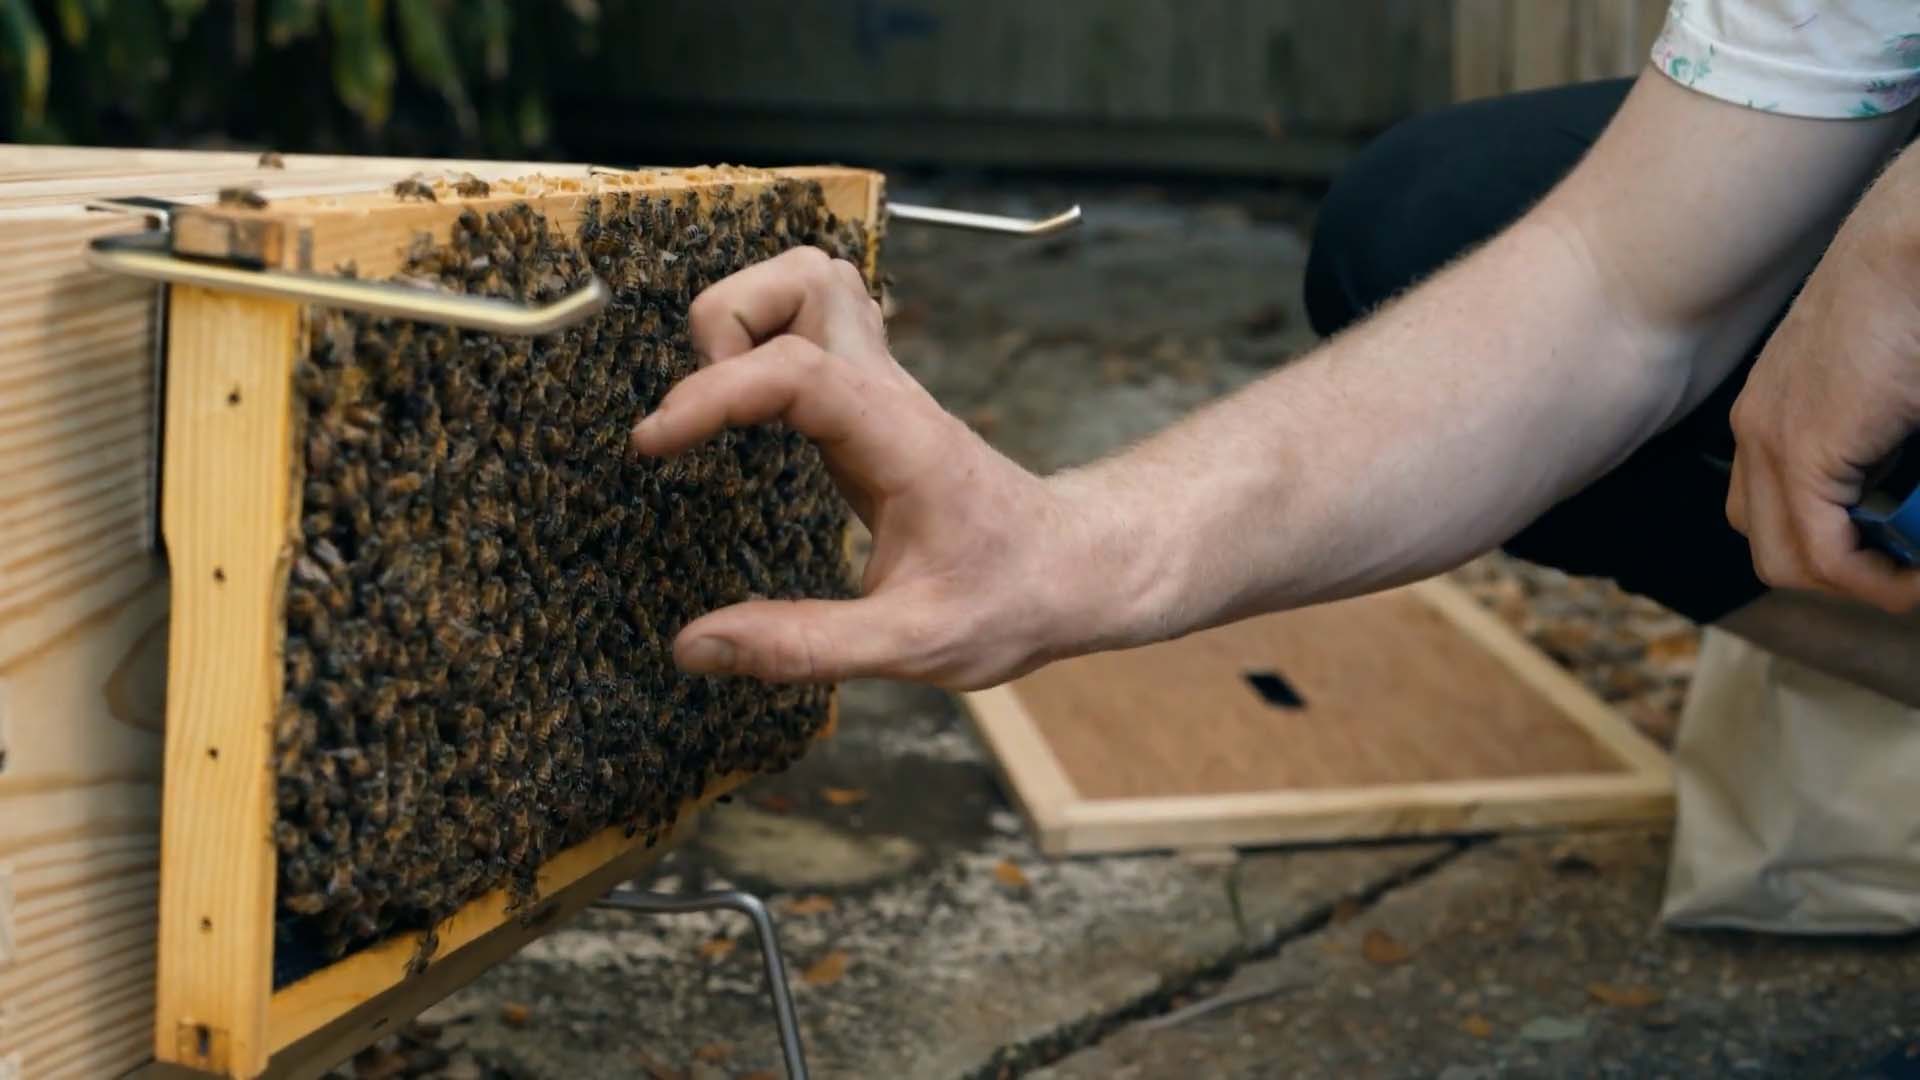 A close up of a beekeeper's hands reaching towards a frame of honey bees